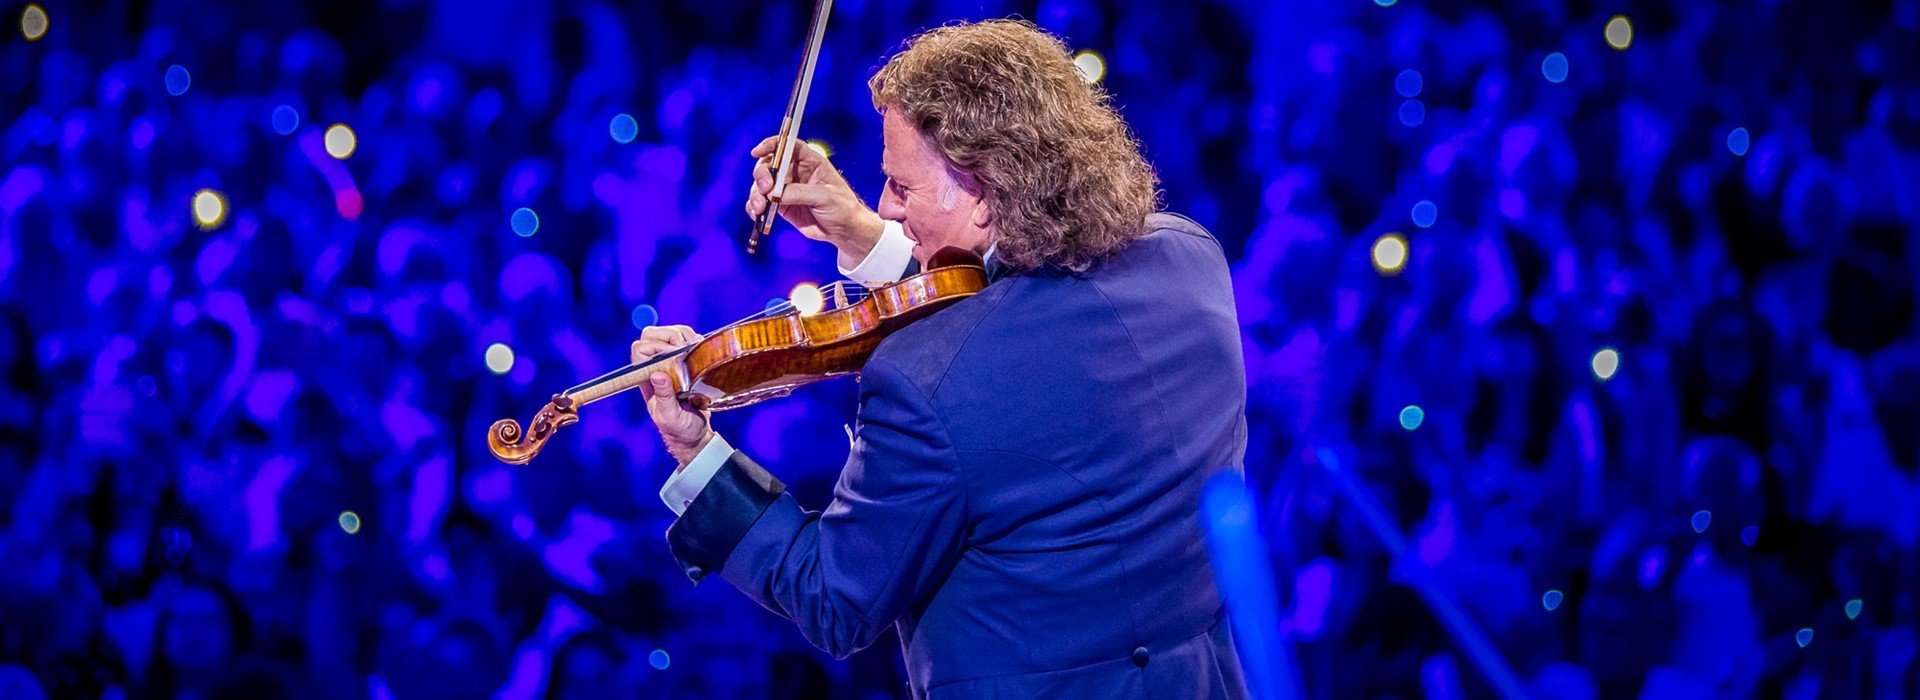 tourhub | Newmarket Holidays | Andre Rieu Christmas Concert in Maastricht by Air - 4 days 